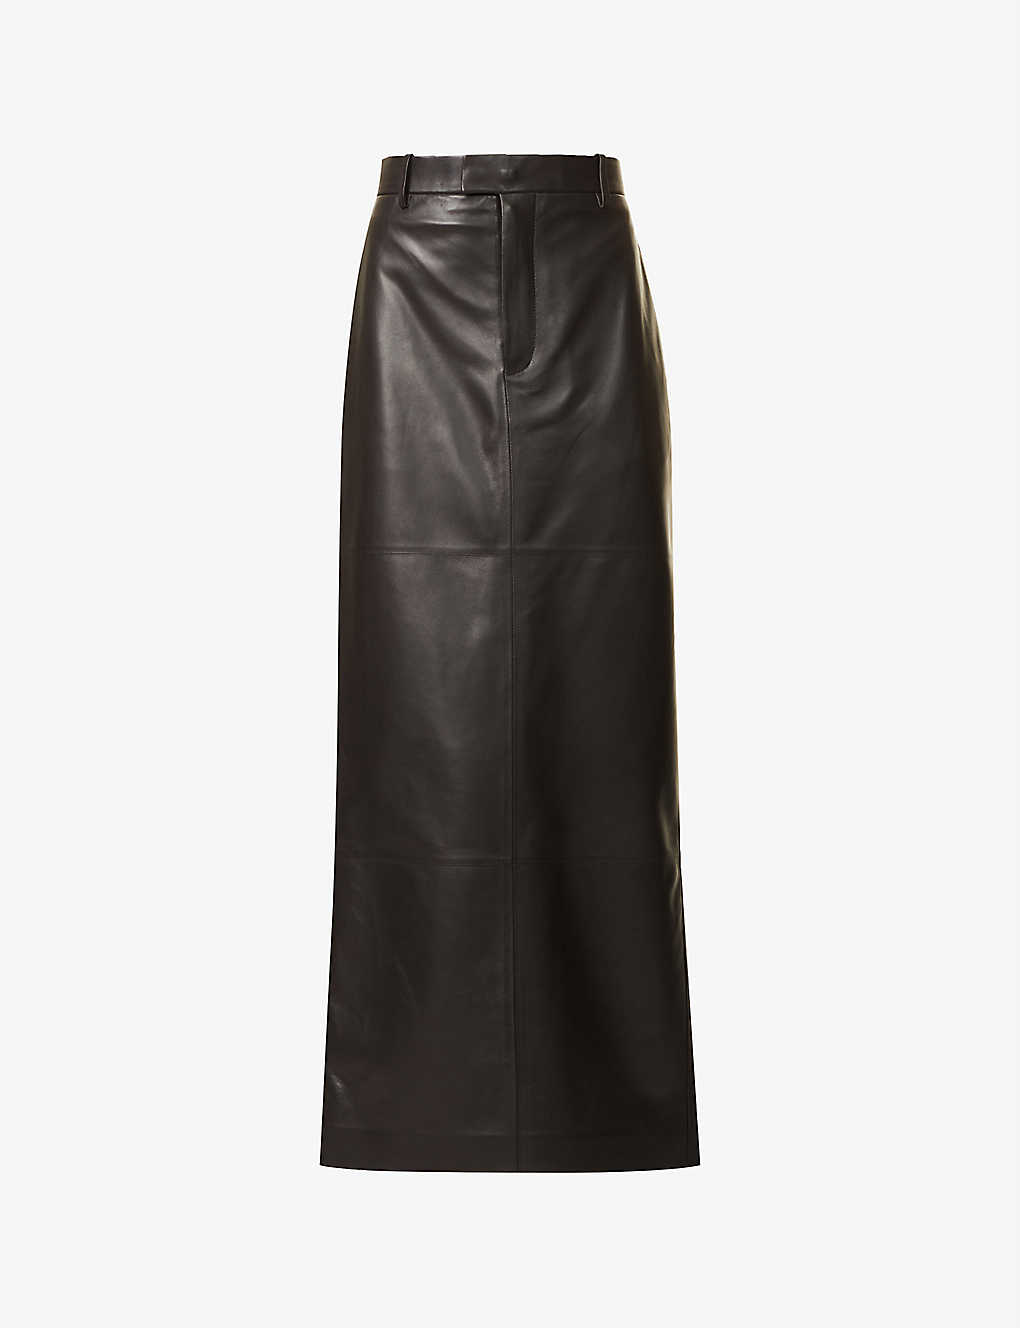 Selfridges & Co Women Clothing Skirts Leather Skirts Darted mid-rise Nappa leather maxi skirt 